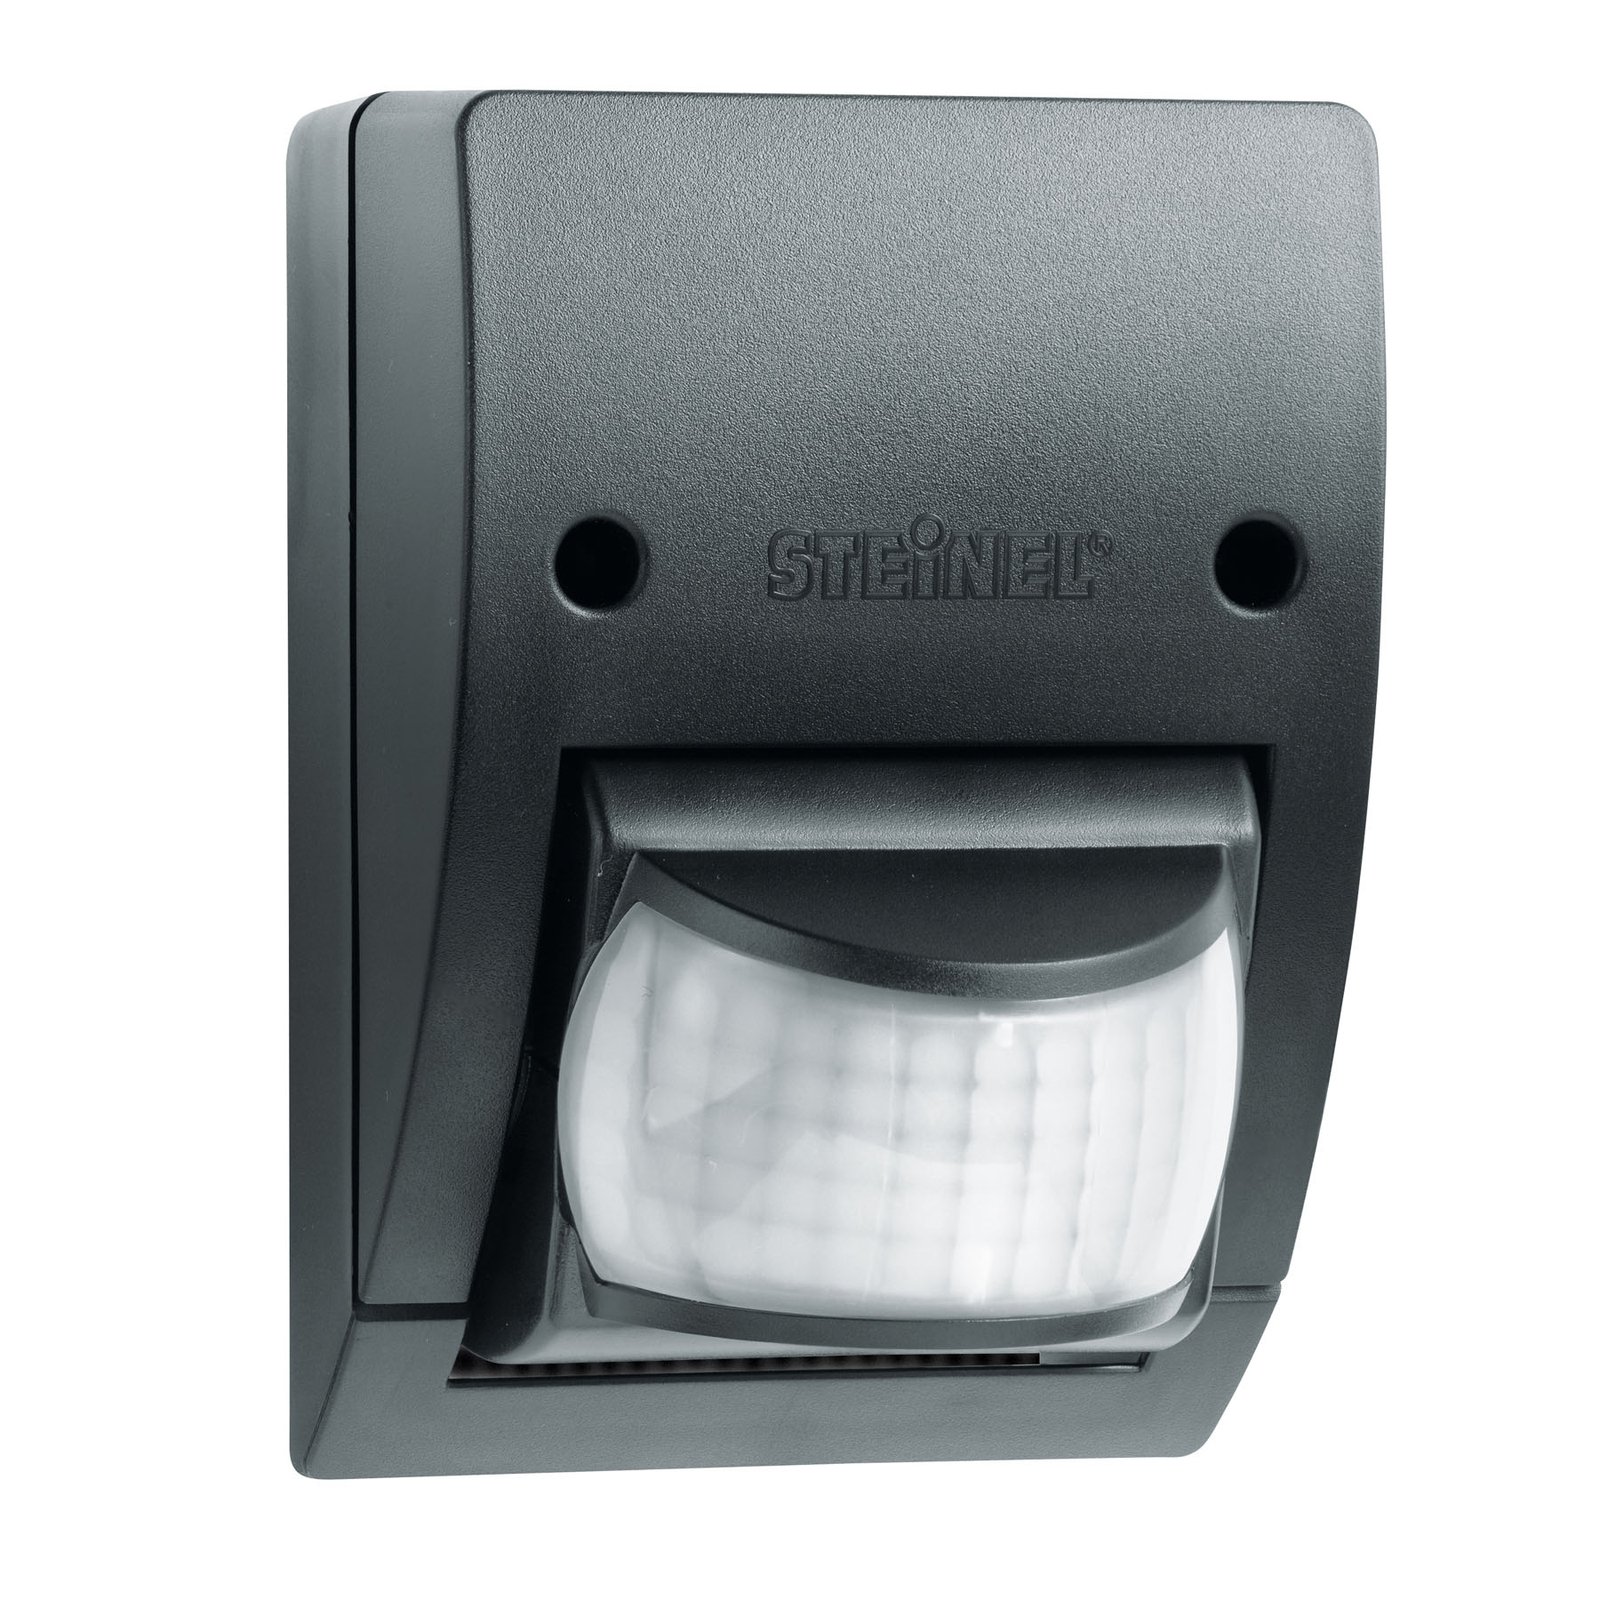 STEINEL IS 2160 ECO infra-red wall sensor black